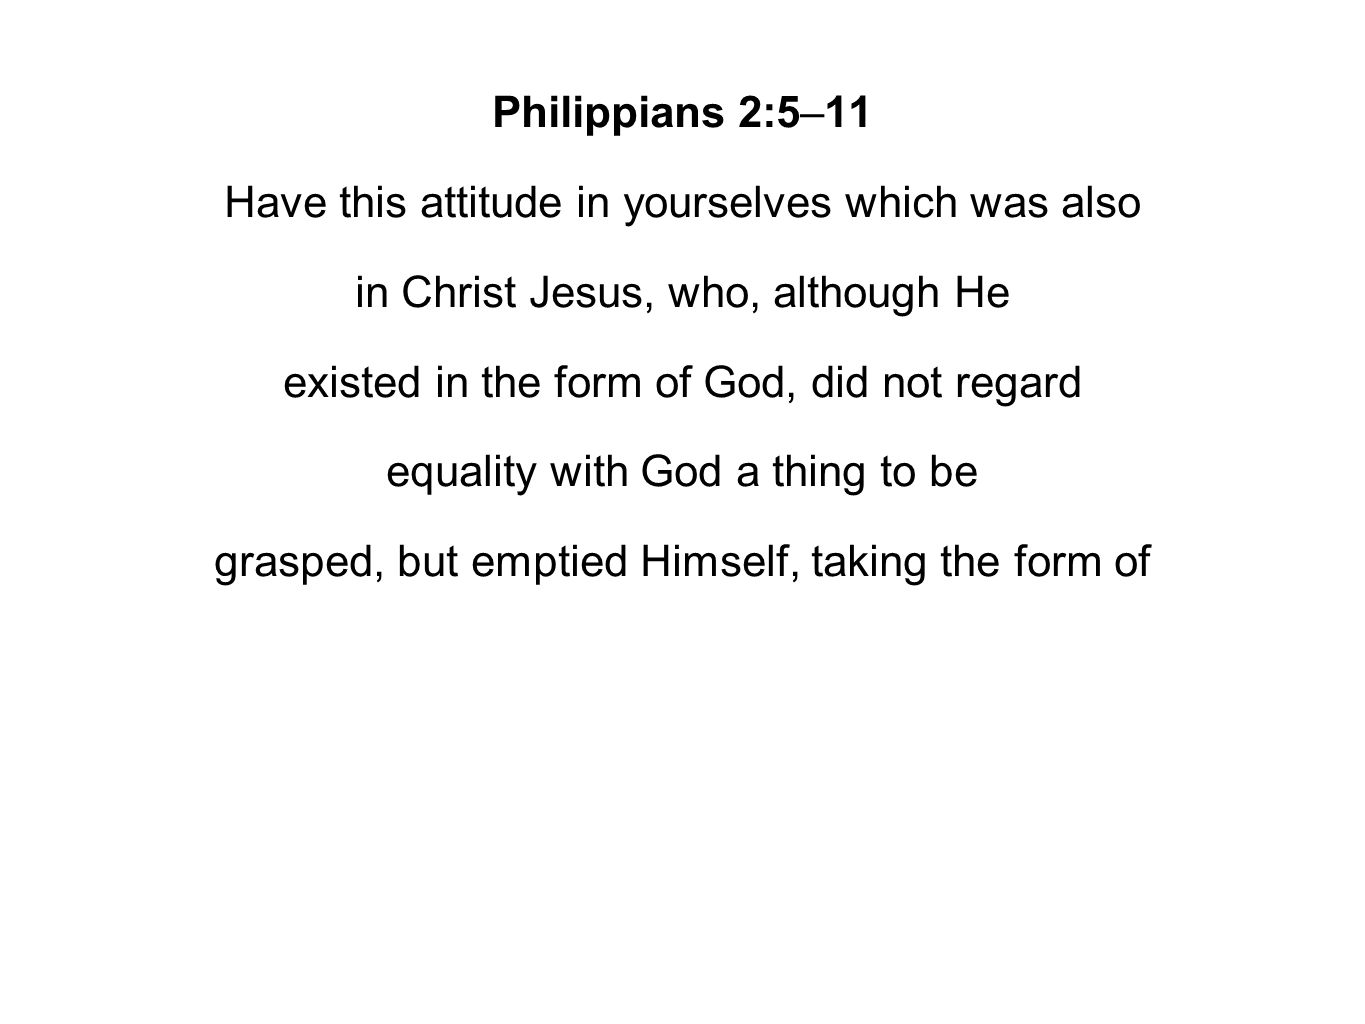 Philippians 2:5–11 Have this attitude in yourselves which was also in Christ Jesus, who, although He existed in the form of God, did not regard equality with God a thing to be grasped, but emptied Himself, taking the form of